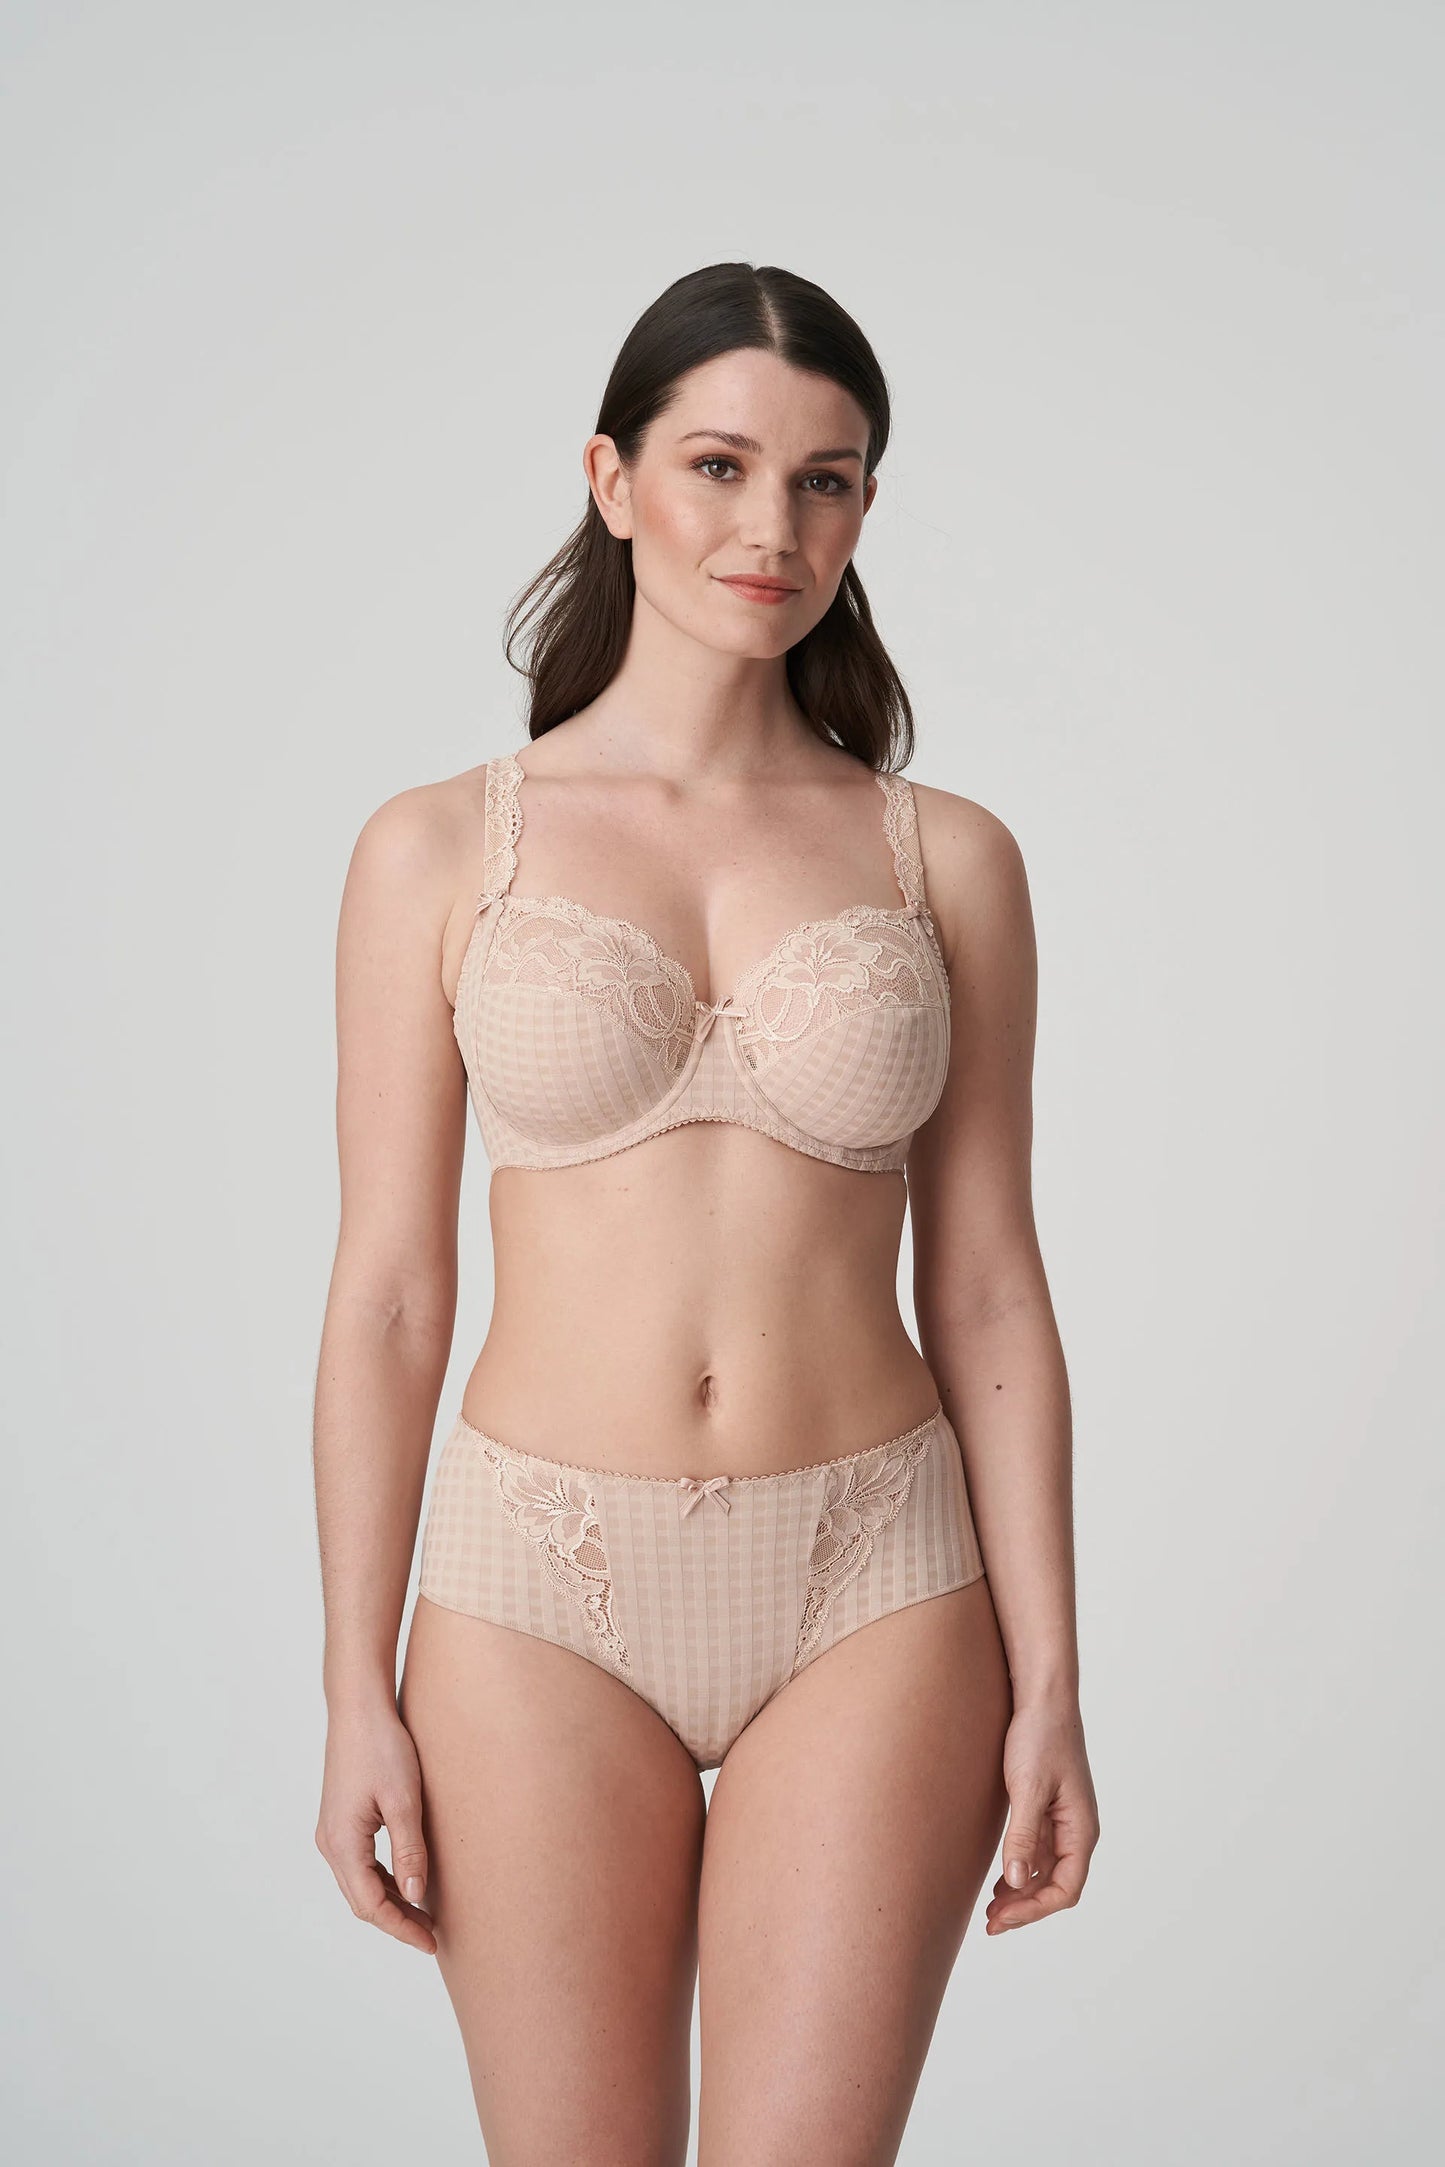 Madison Full Cup Underwire Bra in Caffe Latte worn by model front view image